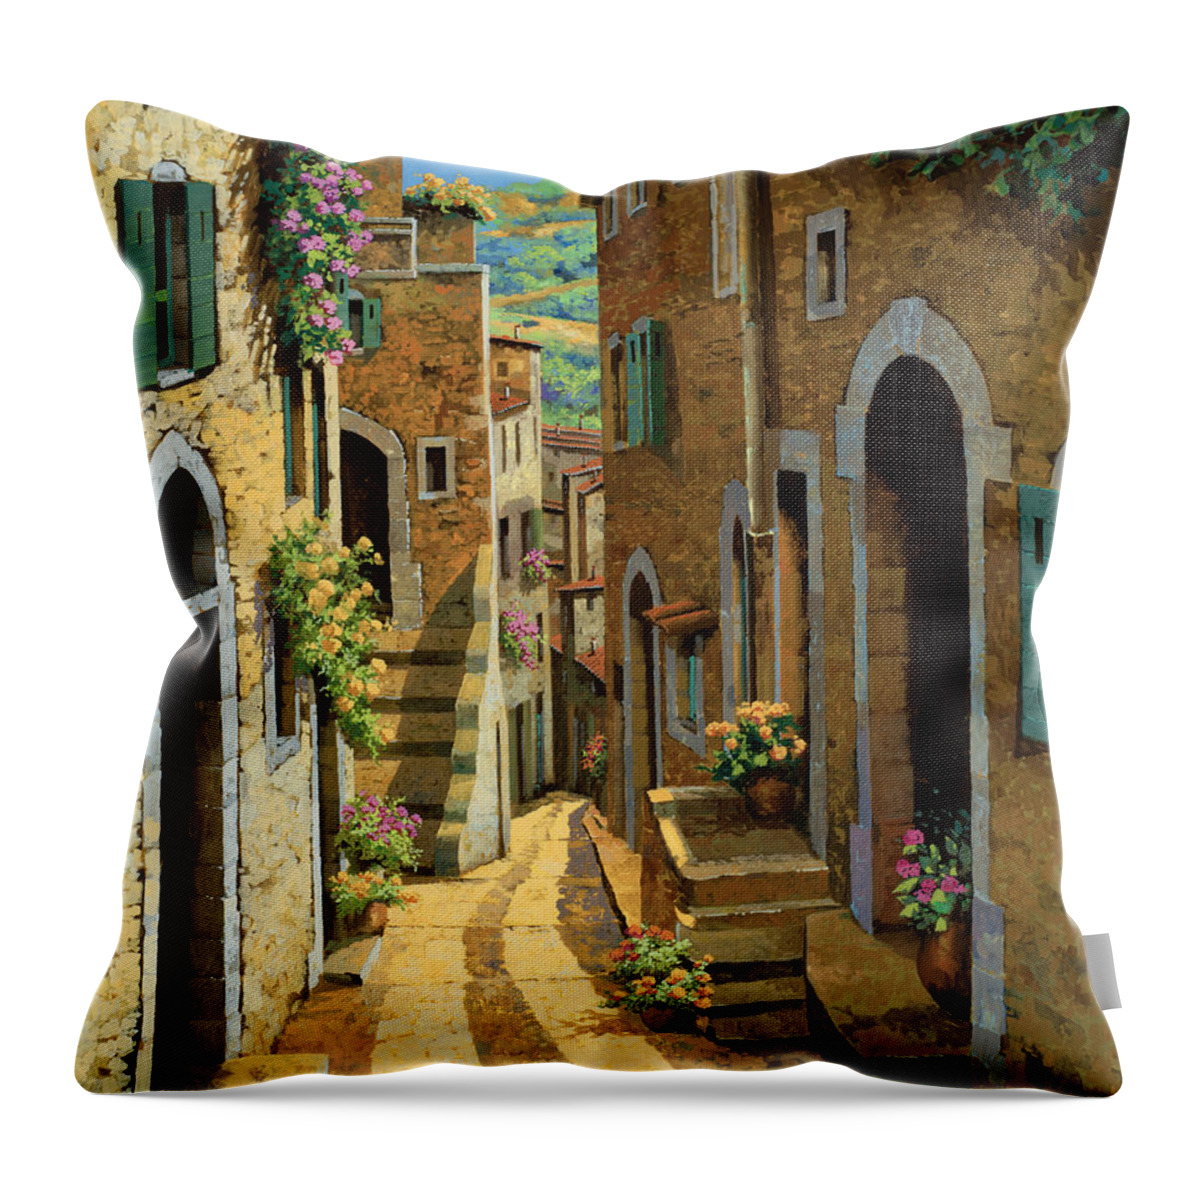 Village Throw Pillow featuring the painting Un Passaggio Tra Le Case by Guido Borelli